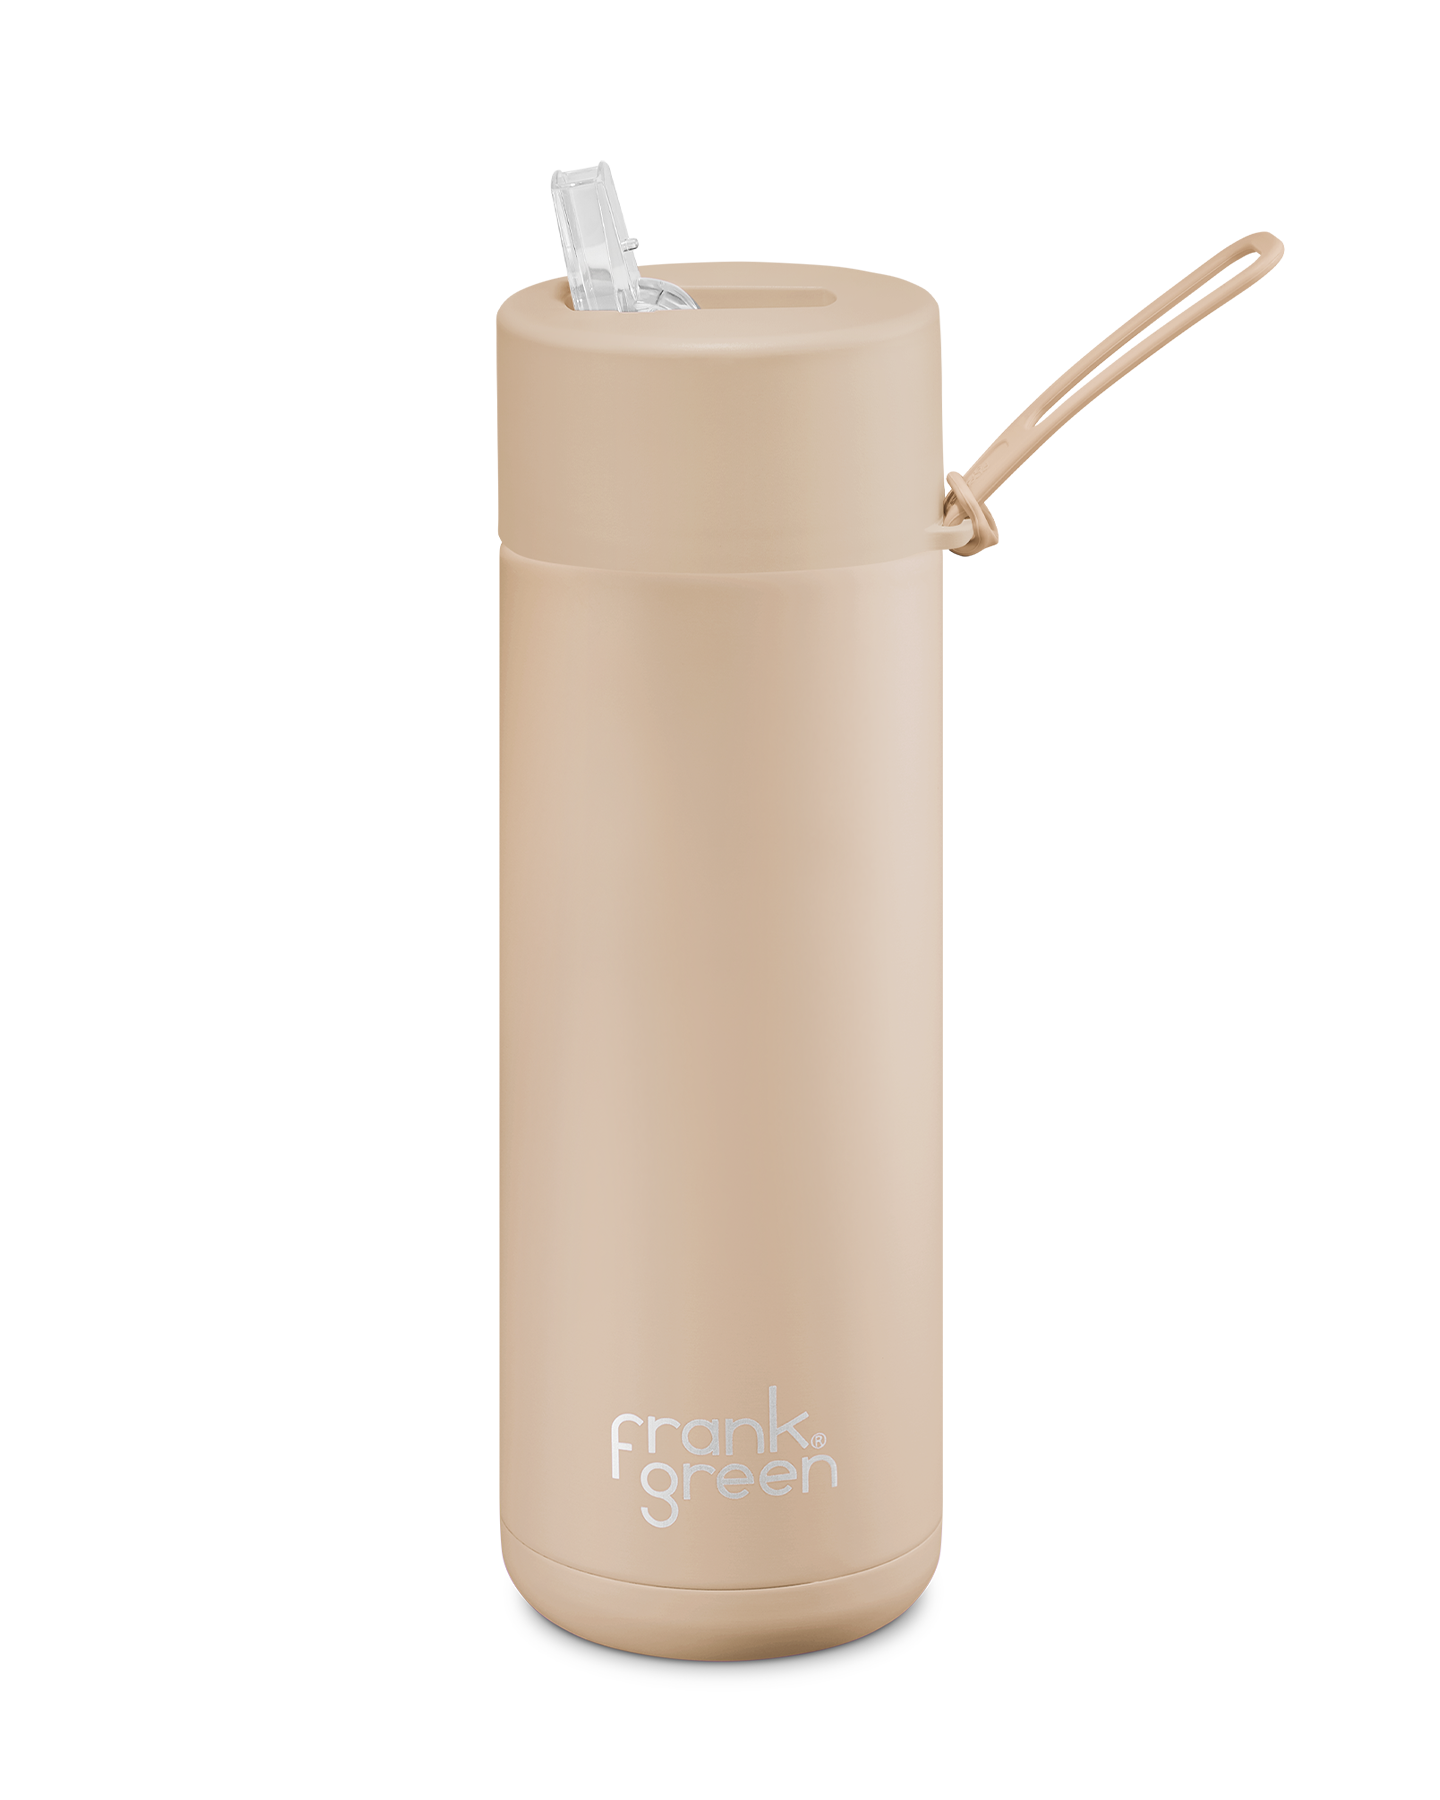 FRANK GREEN CERAMIC REUSABLE DRINK BOTTLE 20oz WITH STRAW LID - SOFT STONE